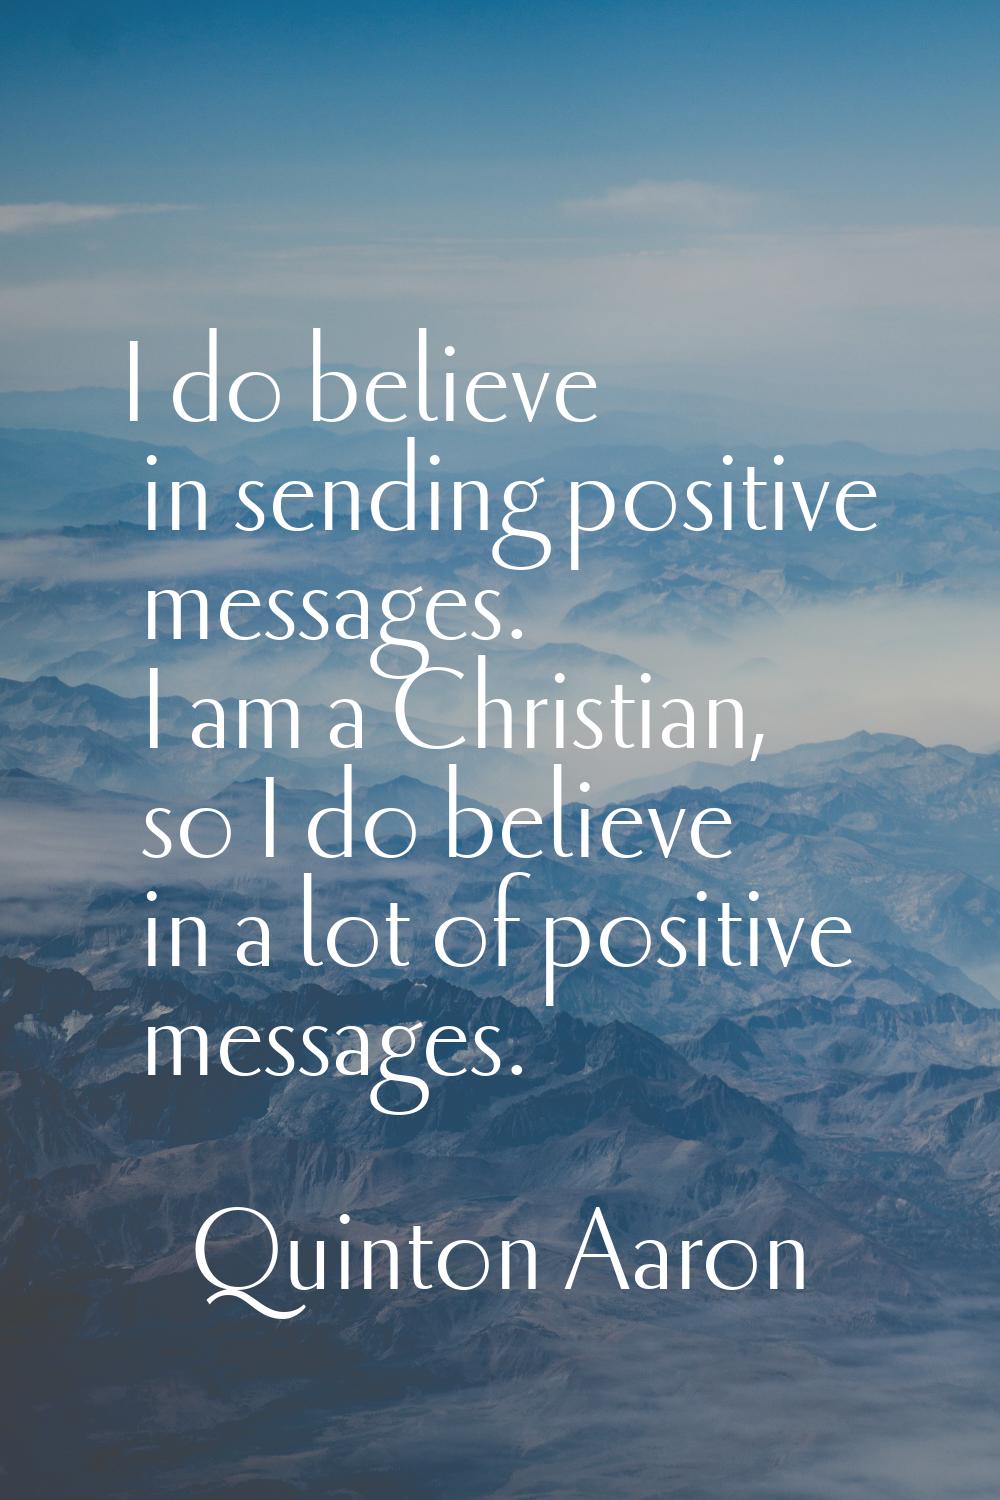 I do believe in sending positive messages. I am a Christian, so I do believe in a lot of positive m